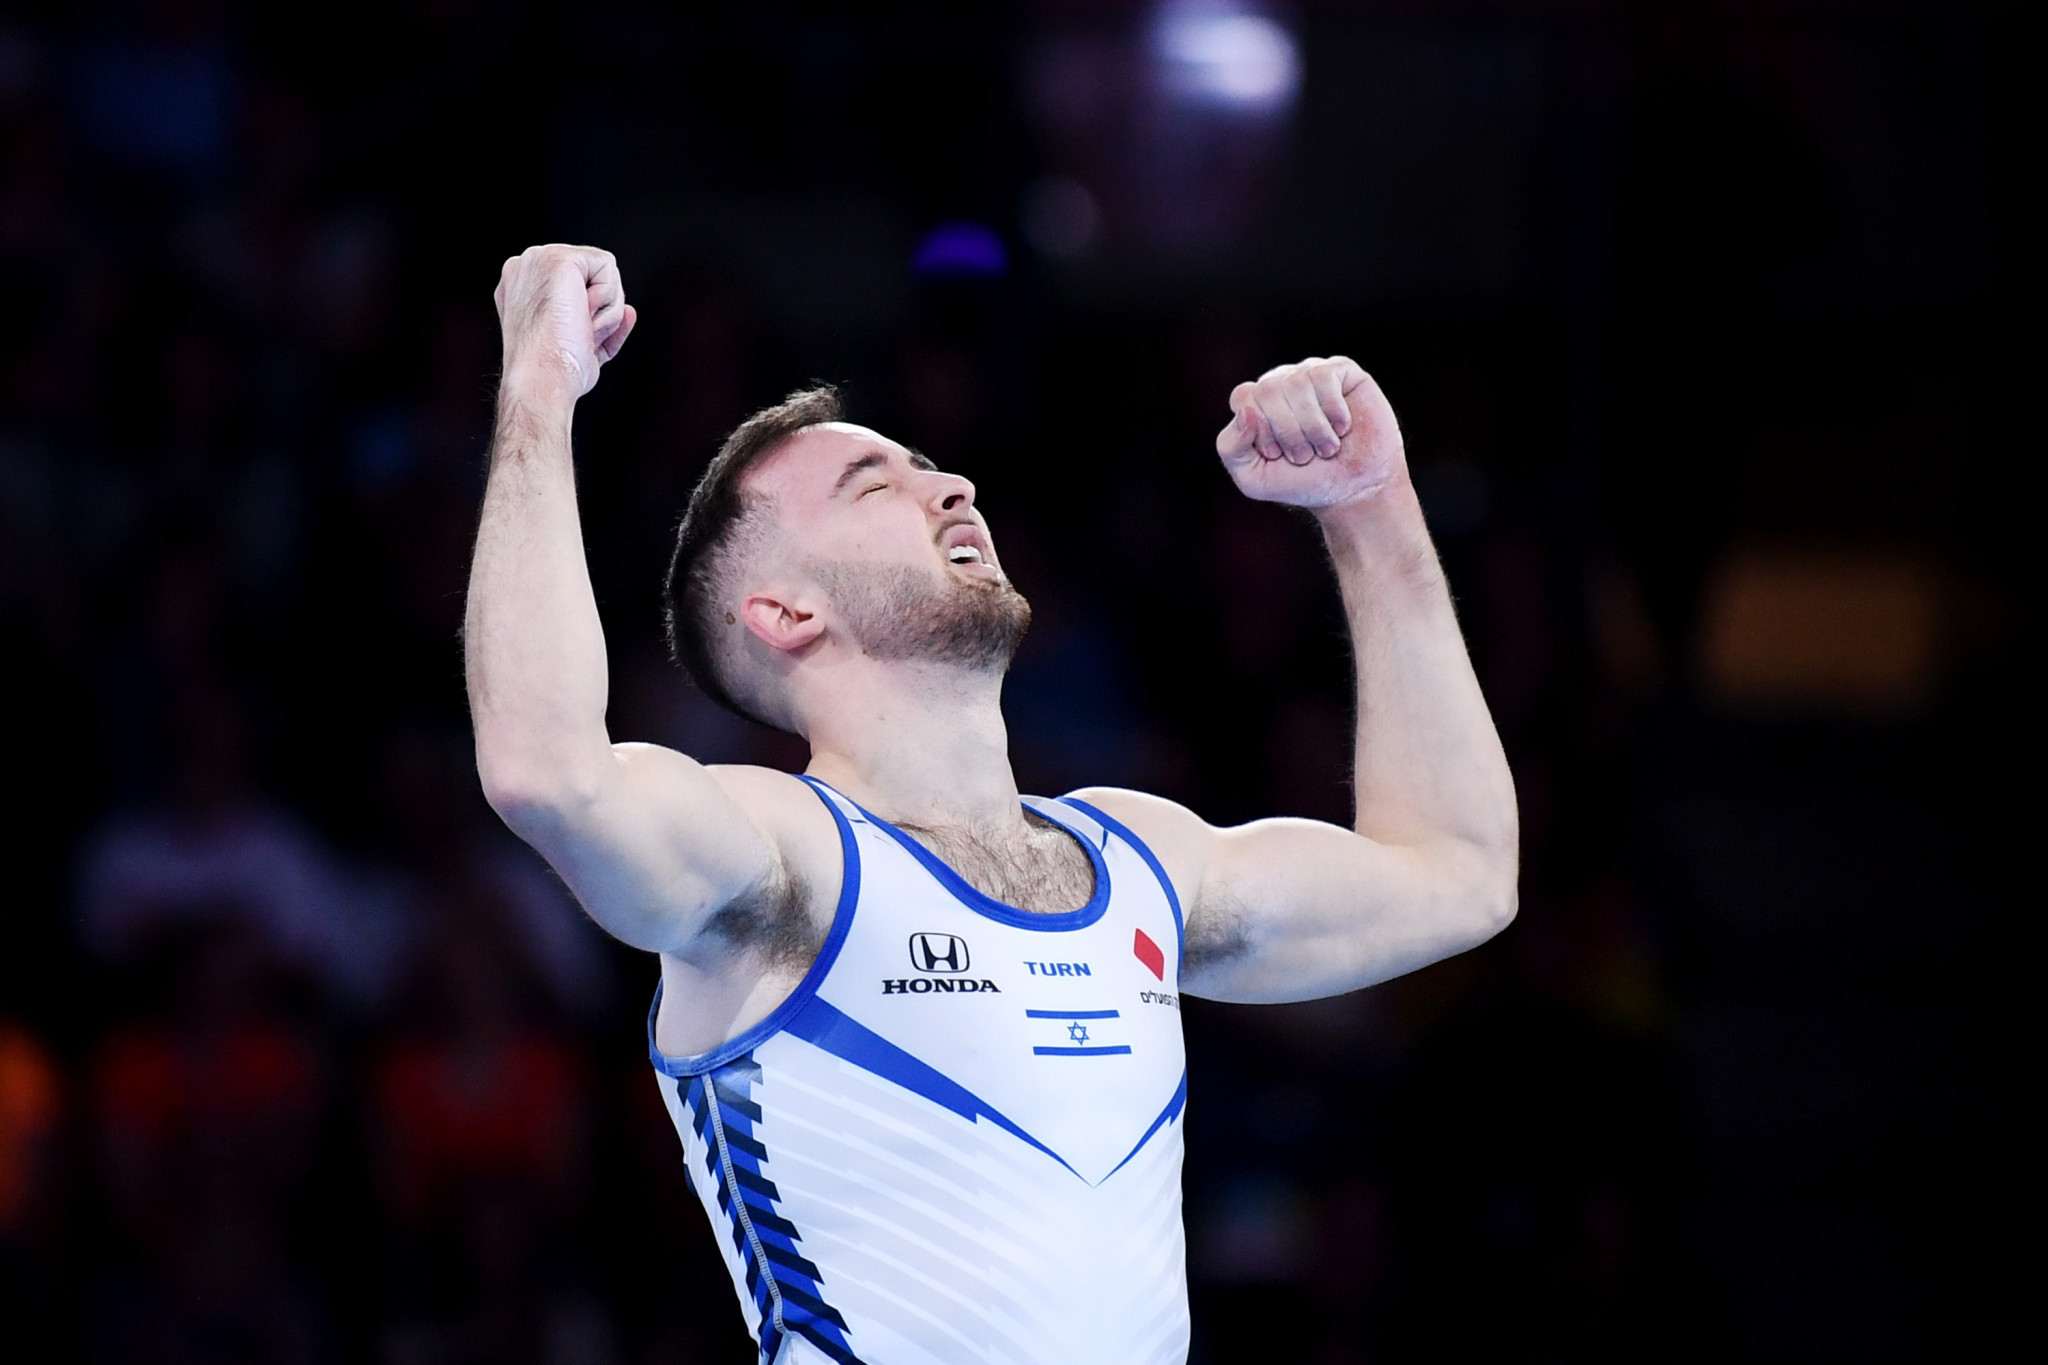 Dolgopyat claims gold at FIG Artistic Gymnastics World Cup in Cairo